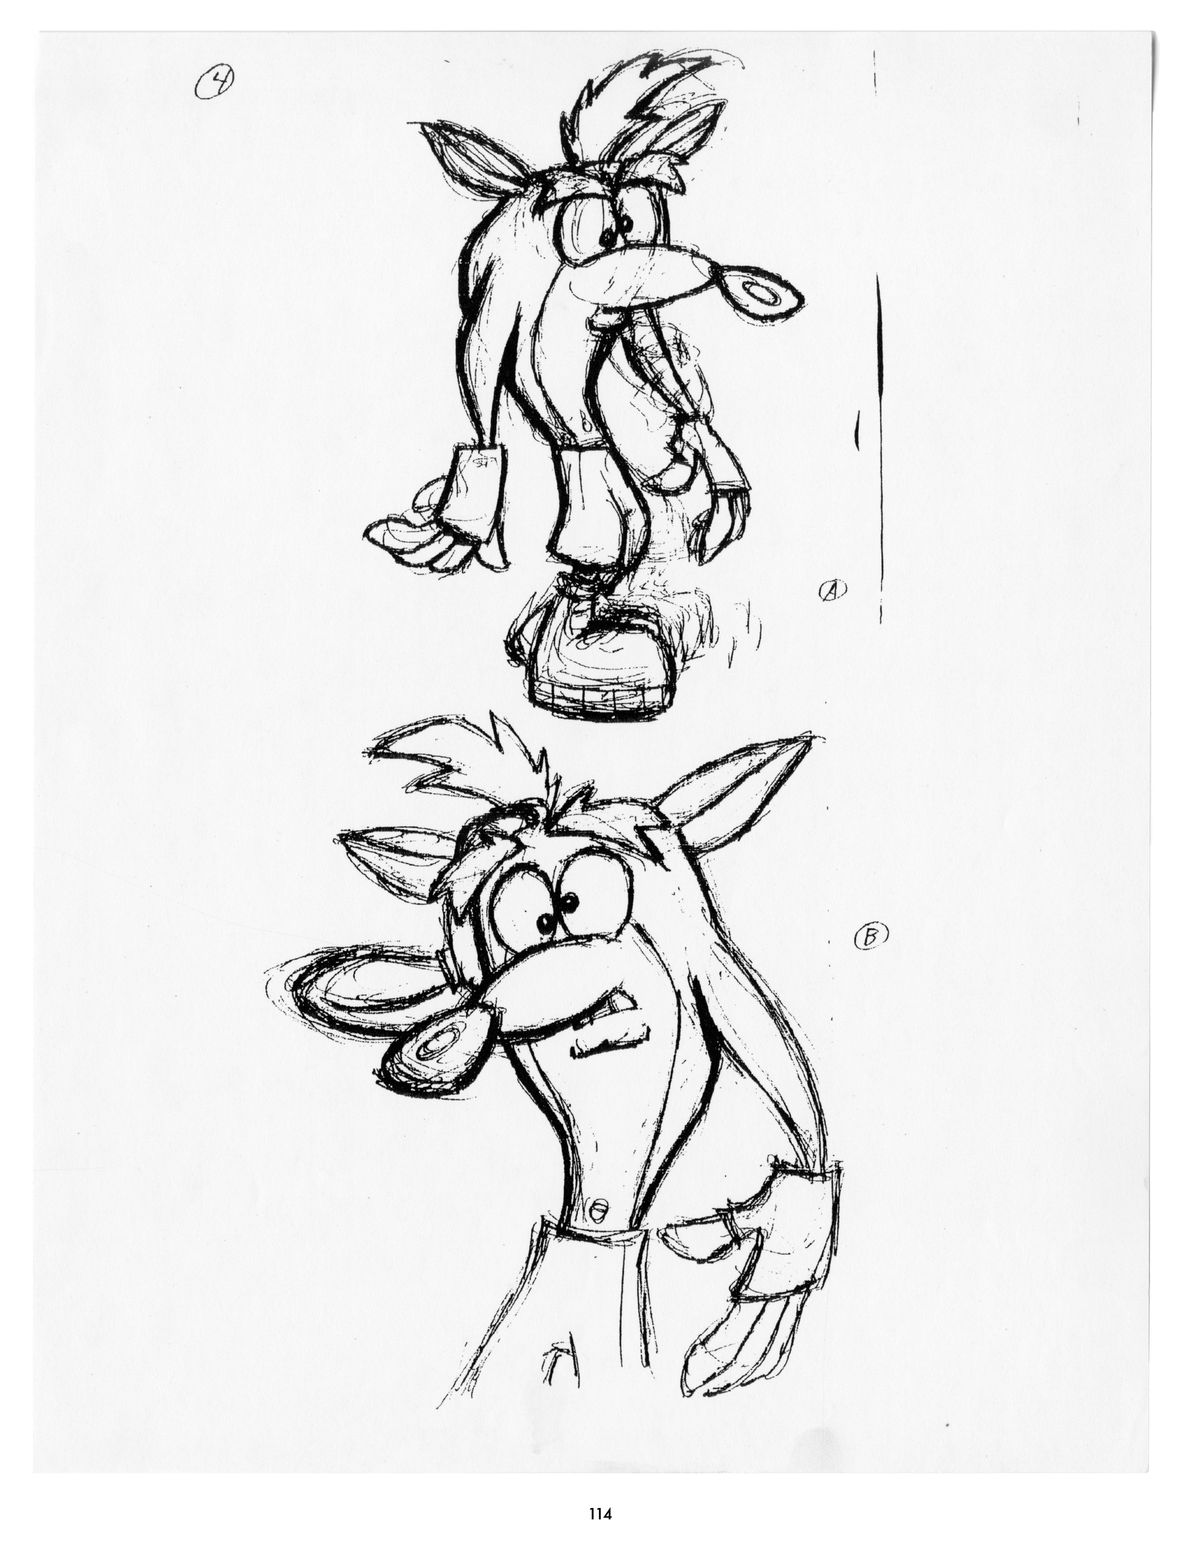 Pages from The&nbsp;Crash&nbsp;Bandicoot Files:&nbsp;How Willy the Wombat Sparked Marsupial Mania, Dark Horse Books.